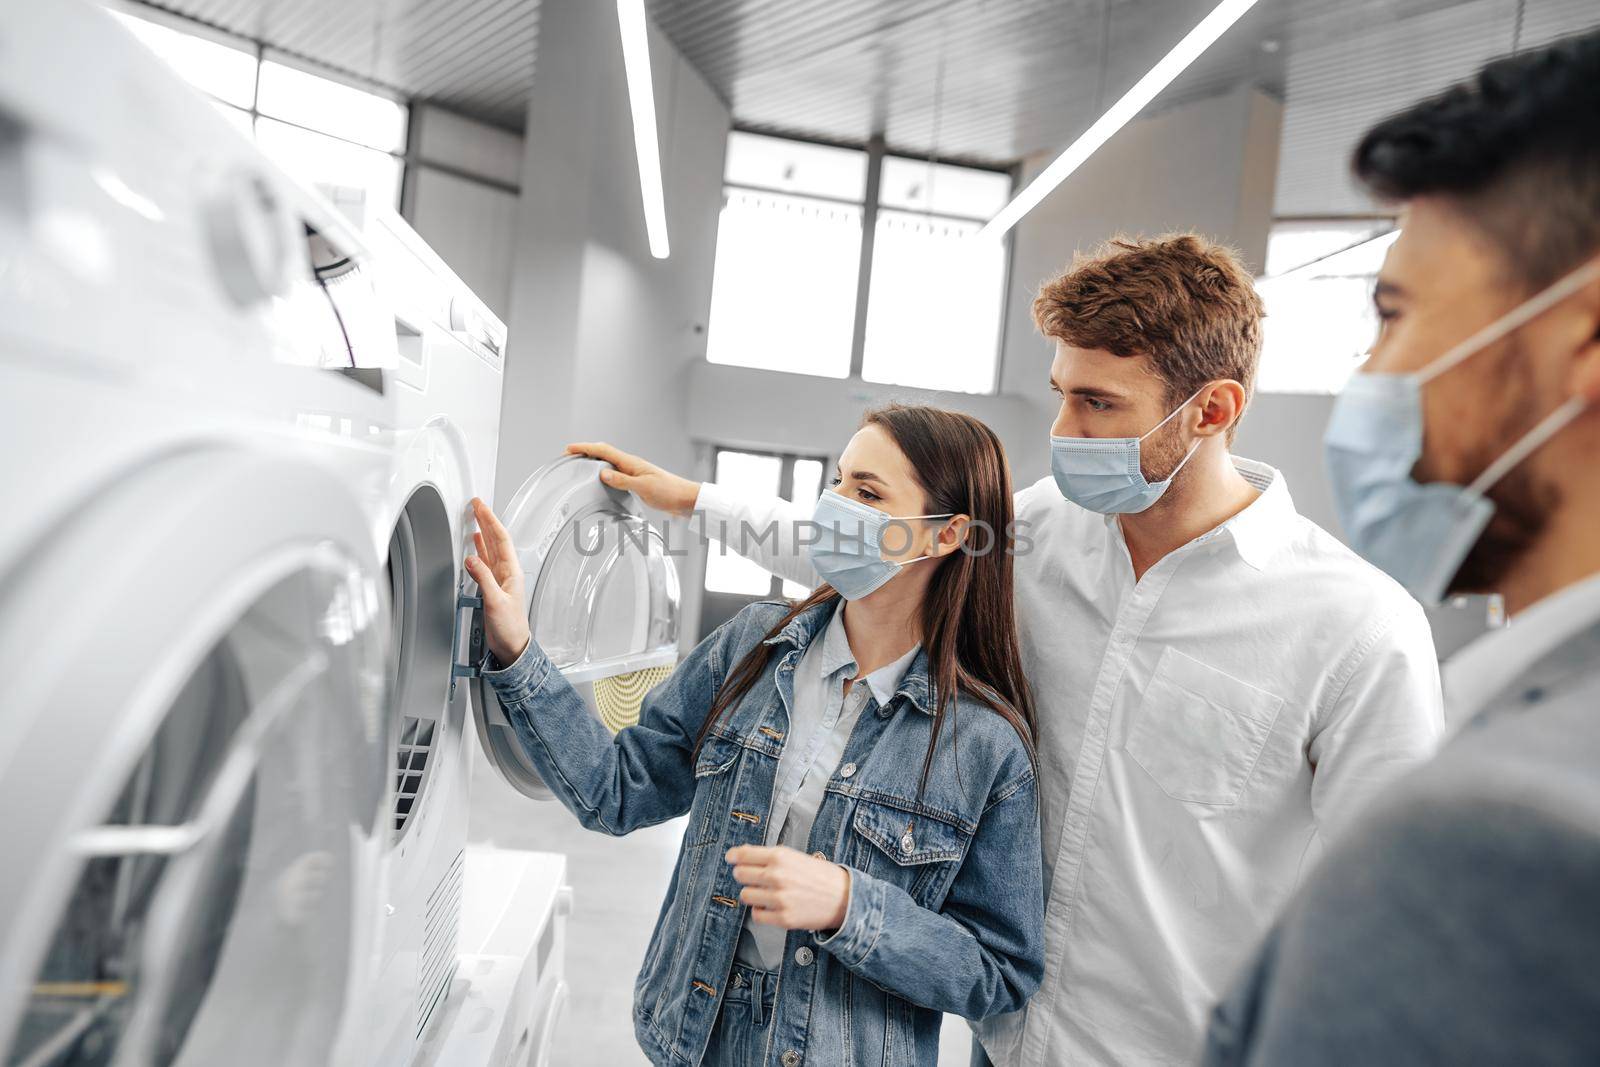 Salesman in hypermarket wearing medical mask demonstrates his clients a new washing machine, close up